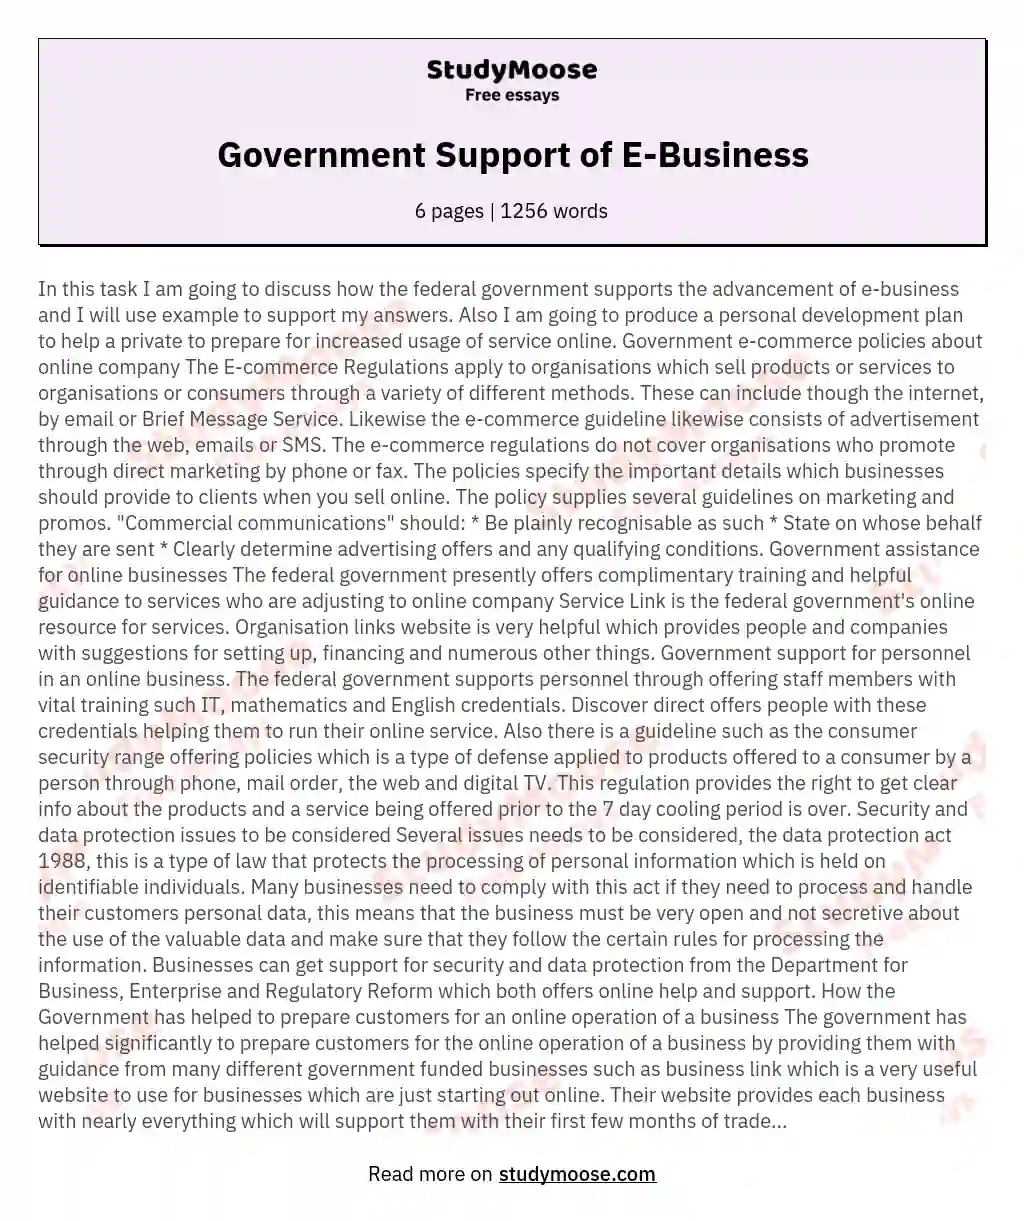 Government Support of E-Business essay